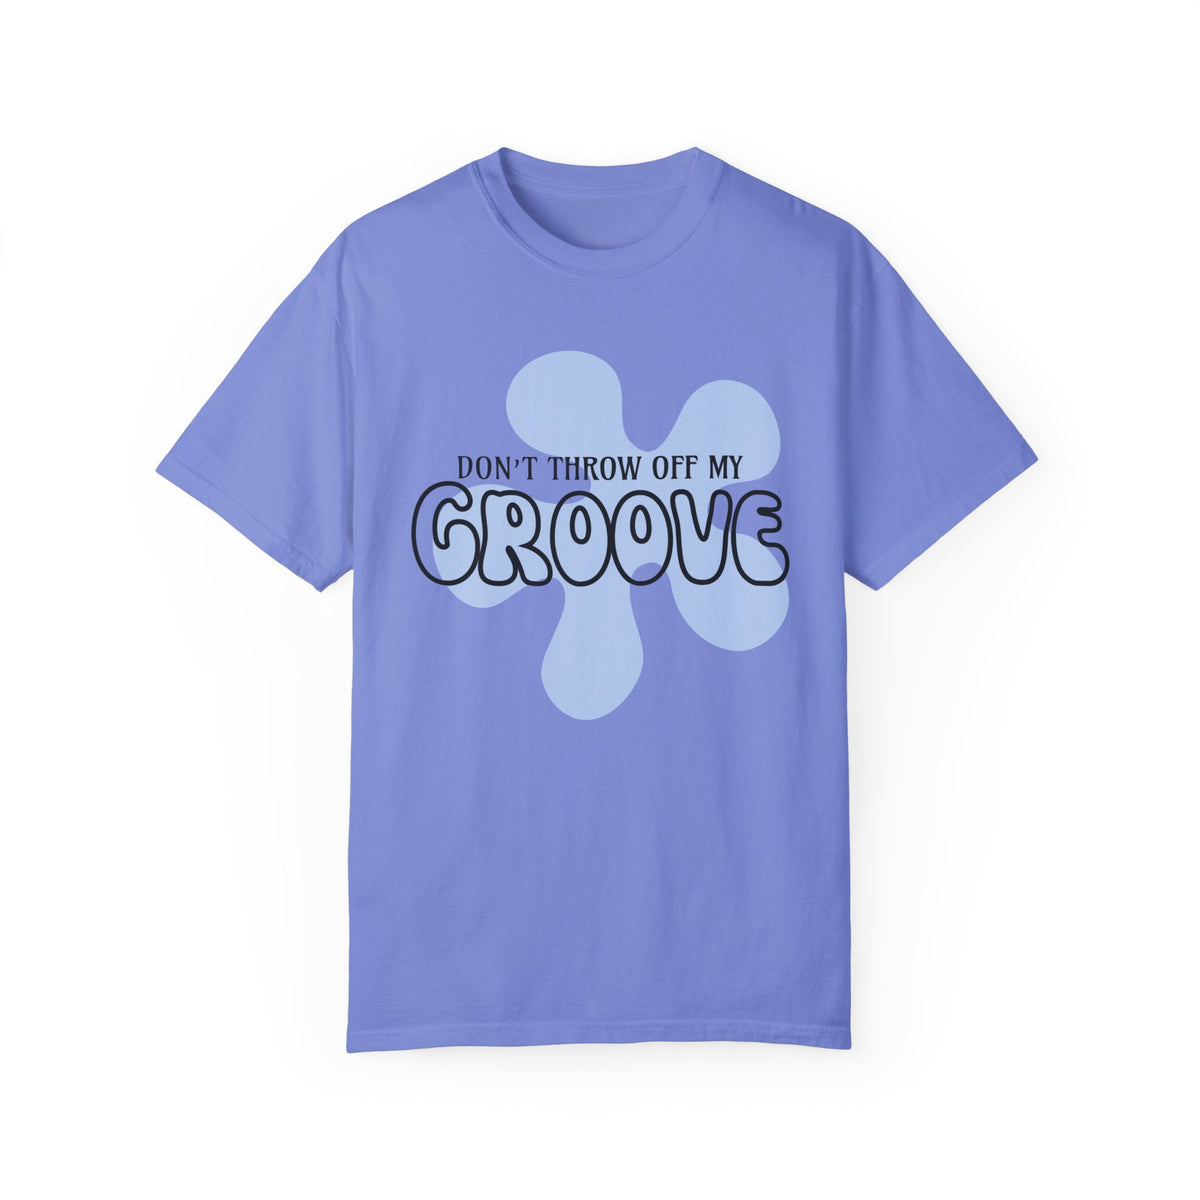 Don't Throw Off My Groove Comfort Colors Unisex Garment-Dyed T-shirt